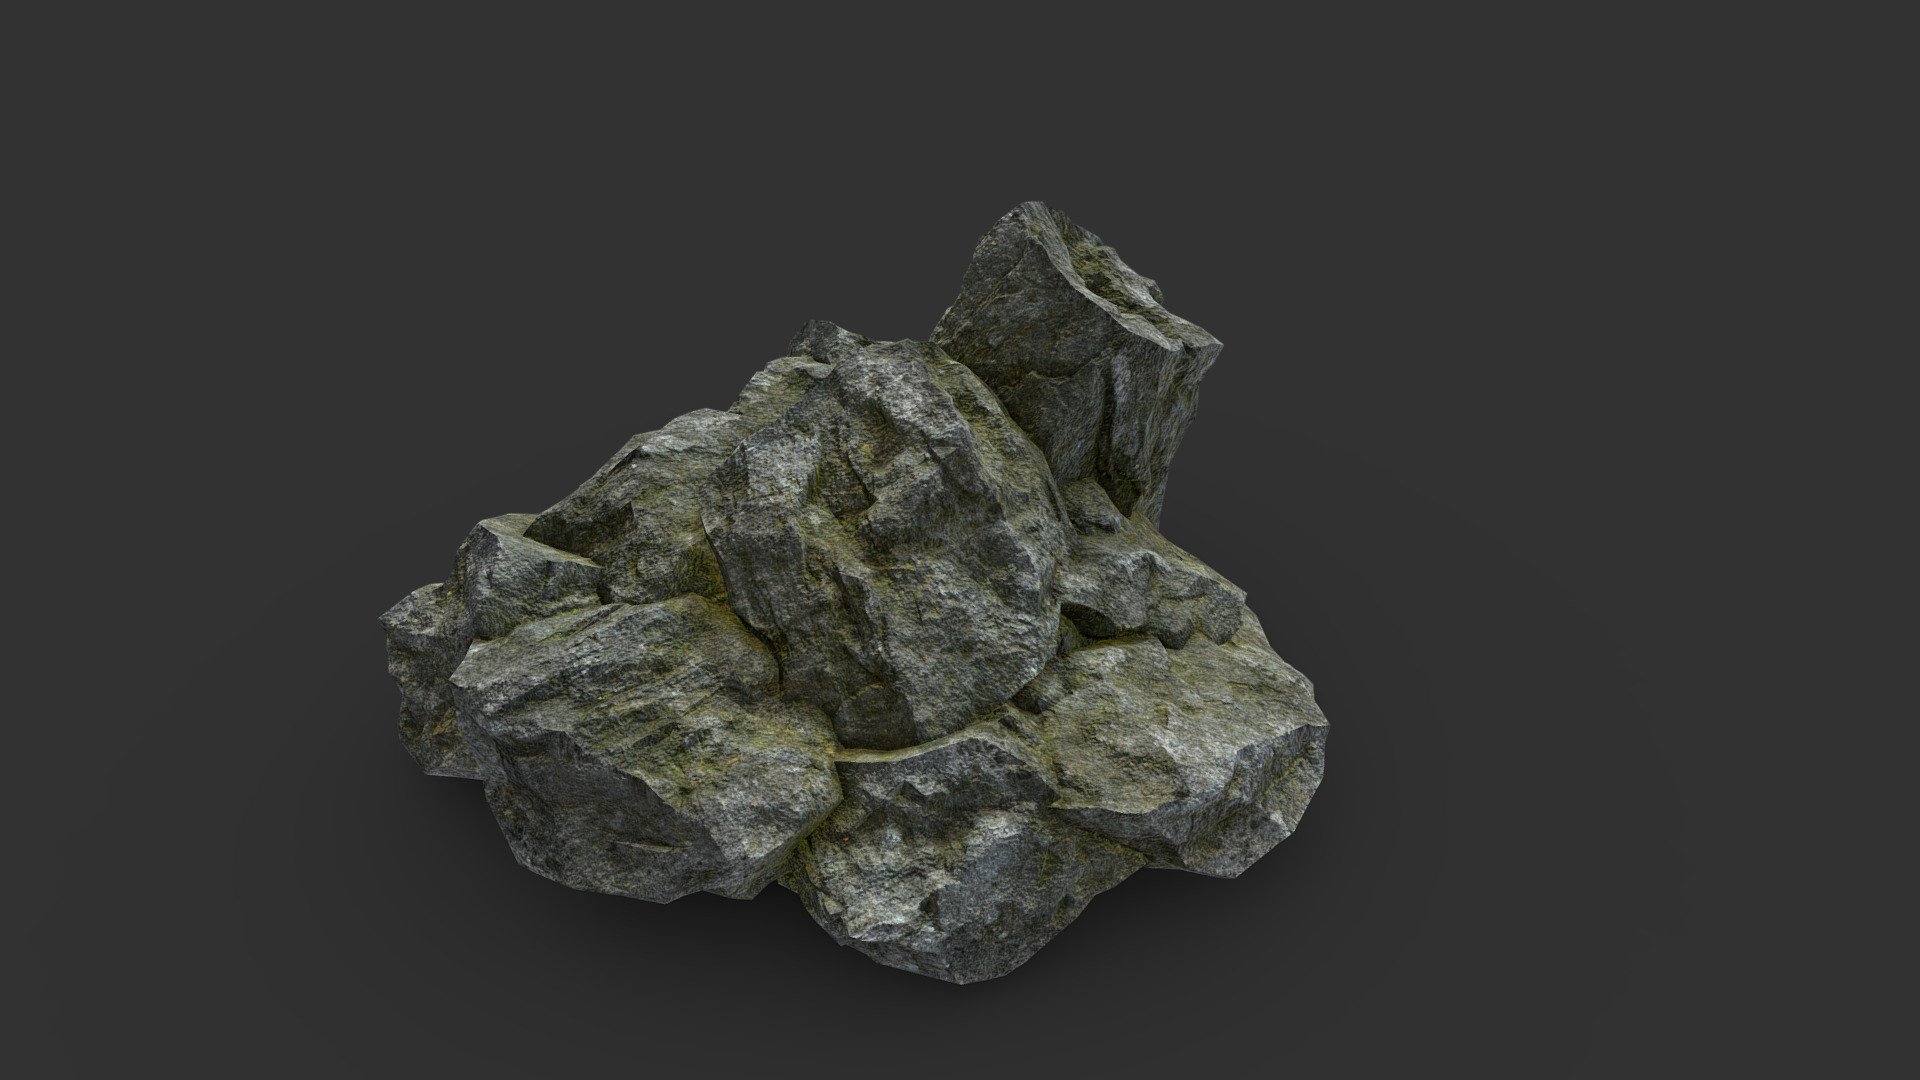 Rock 7_1 low poly

Topology: Tris

Polygon count: 6494

Vertices count: 3249

Textures: Diffuse, Normal, Specular, Glossiness, Curvature, Height, Ambient Occlusion ( all in 4k resolution)

UV mapped with non-overlapping

All files are zipped in one folder. Contains 3 file formats obj, ma &amp; fbx

Useful for games, renders, background scenes and other graphical projects 3d model